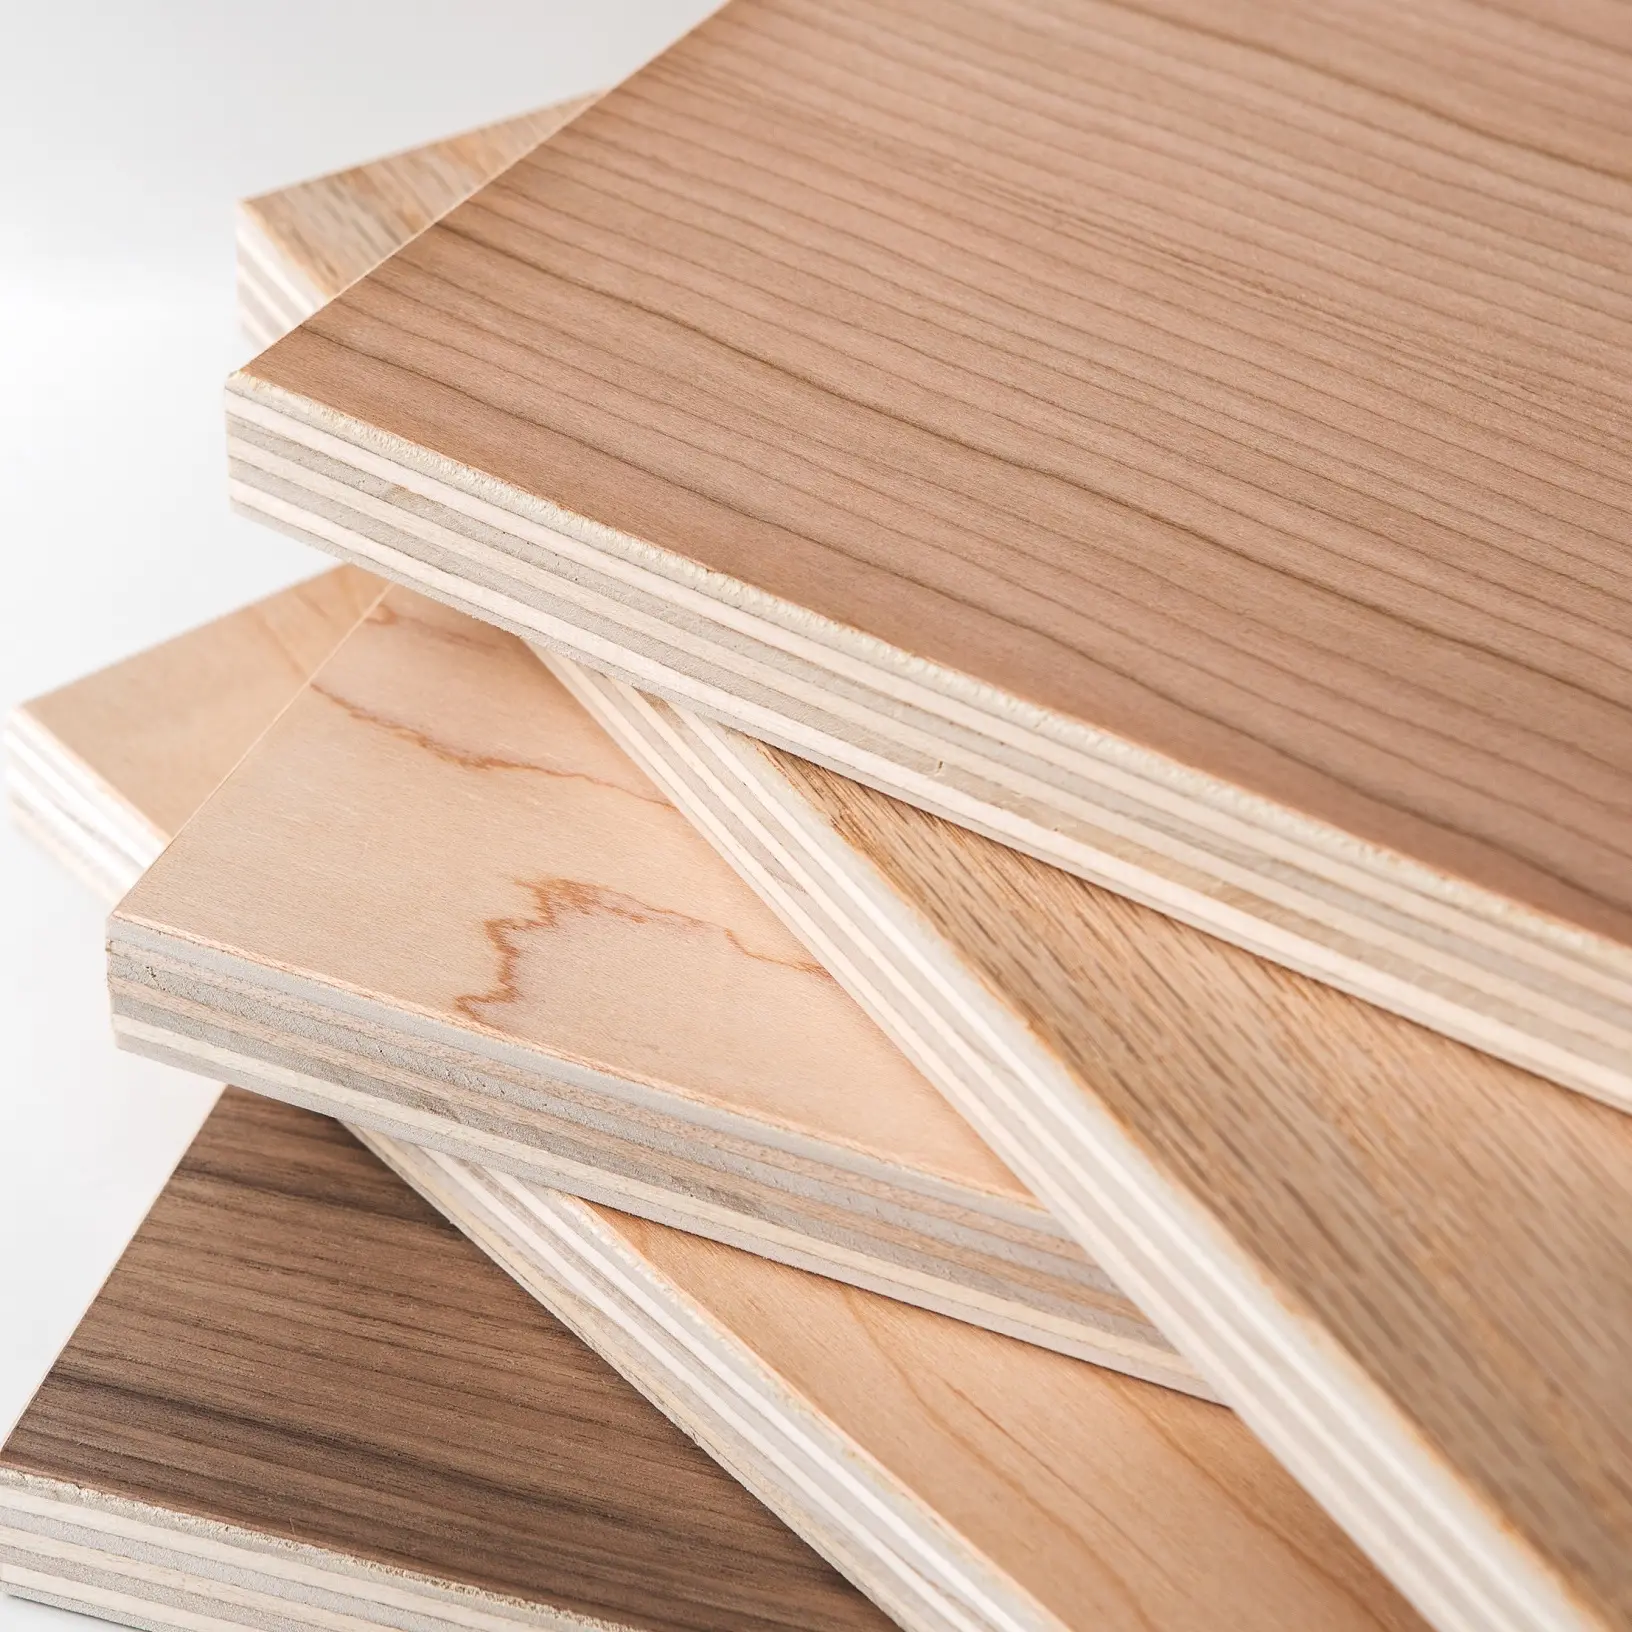 HIGH QUALITY Natural Veneer Faced Commercial Plywood FOR Cabinet & Furniture Usage .